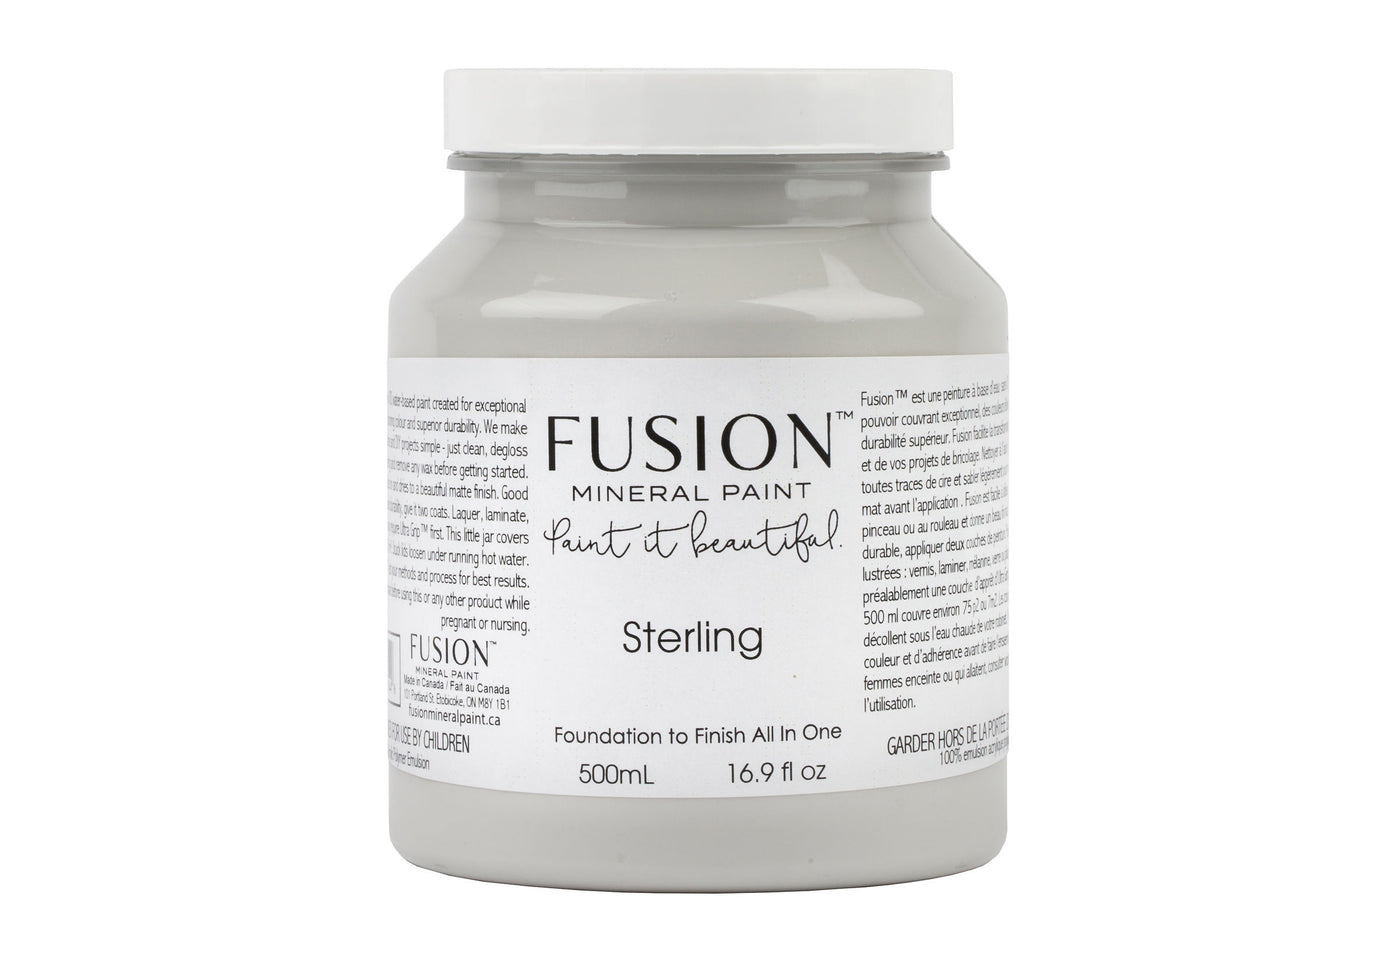 Neutral silver 500ml pint from Fusion Mineral Paint